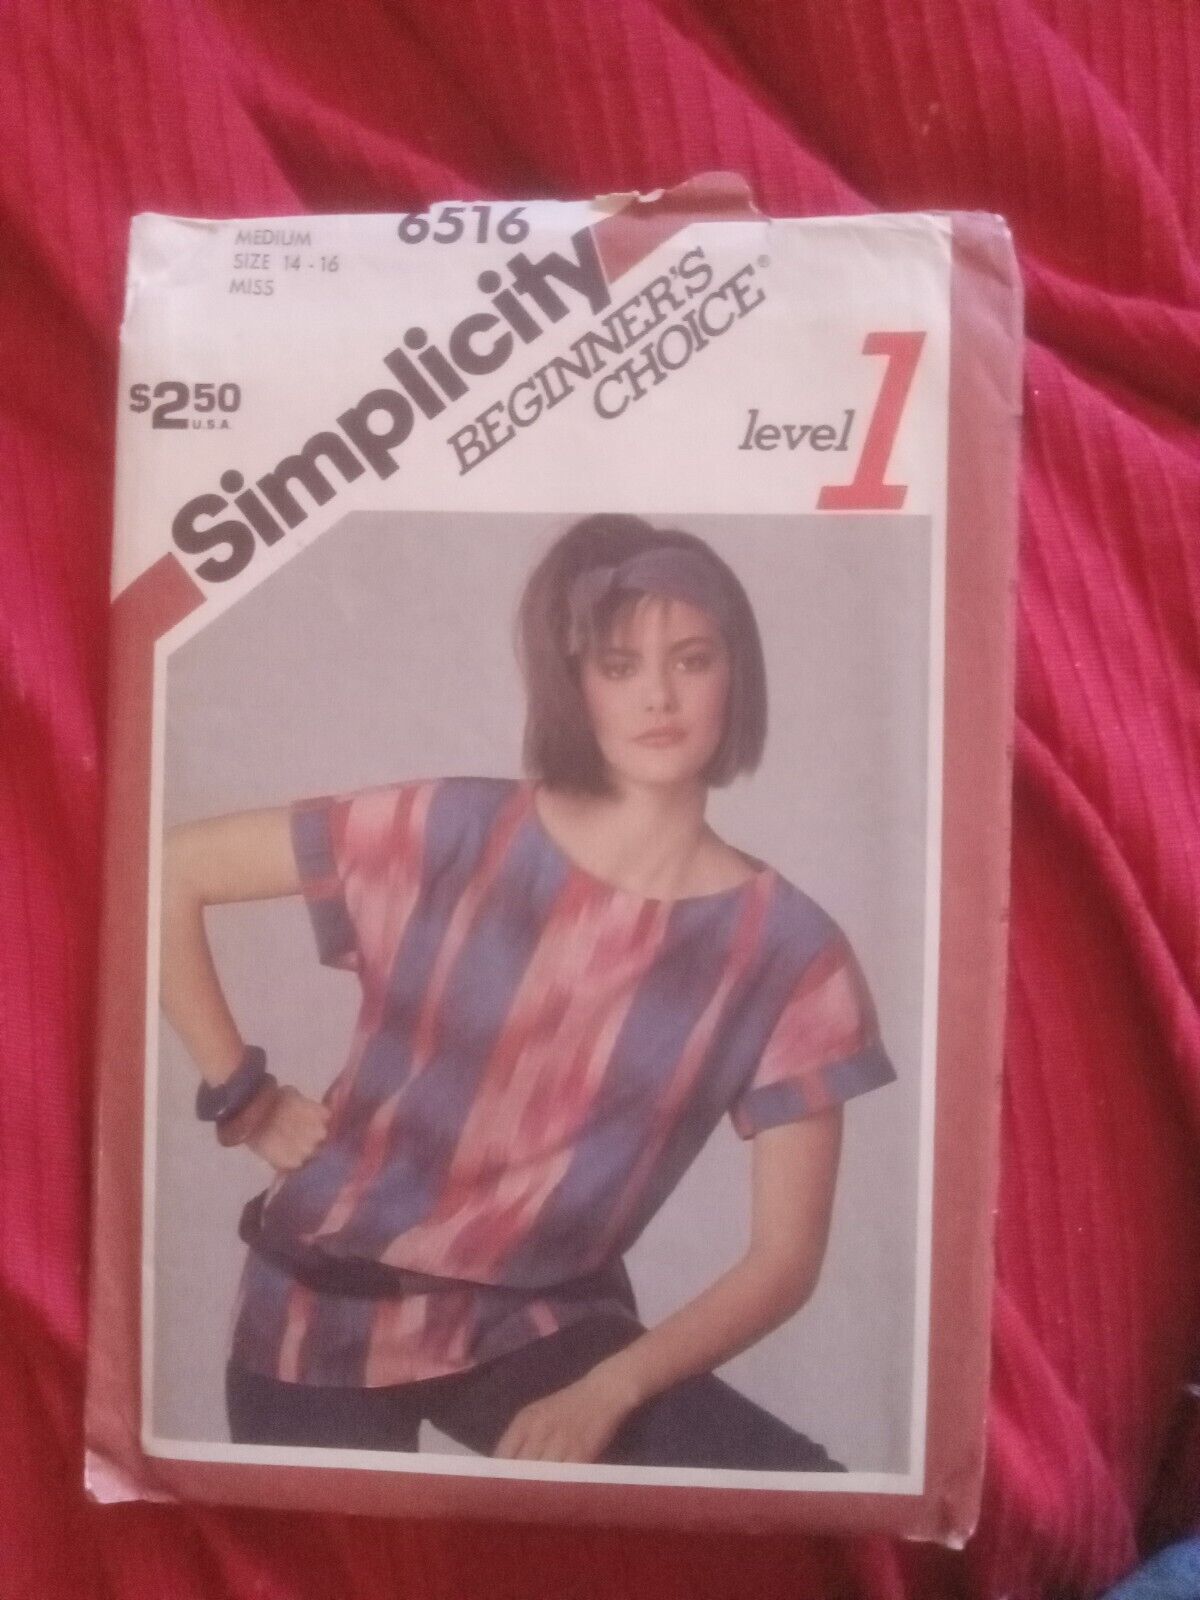 6516 Vintage Simplicity Sewing Pattern Misses Pullover Top Easy Fitting 14-16 Mi